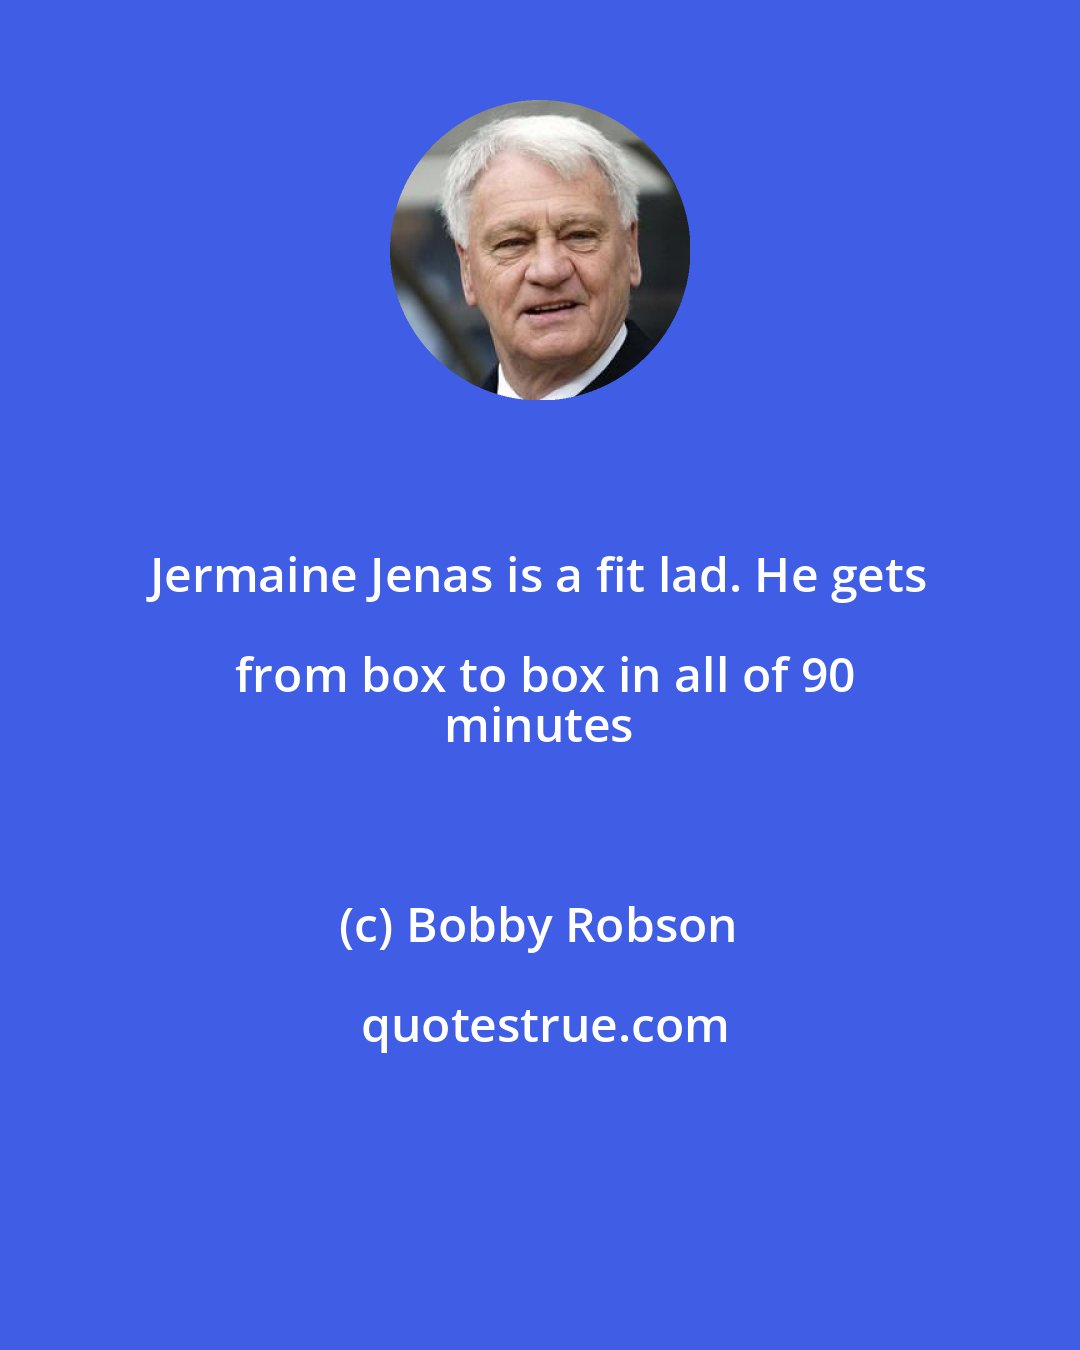 Bobby Robson: Jermaine Jenas is a fit lad. He gets from box to box in all of 90
 minutes